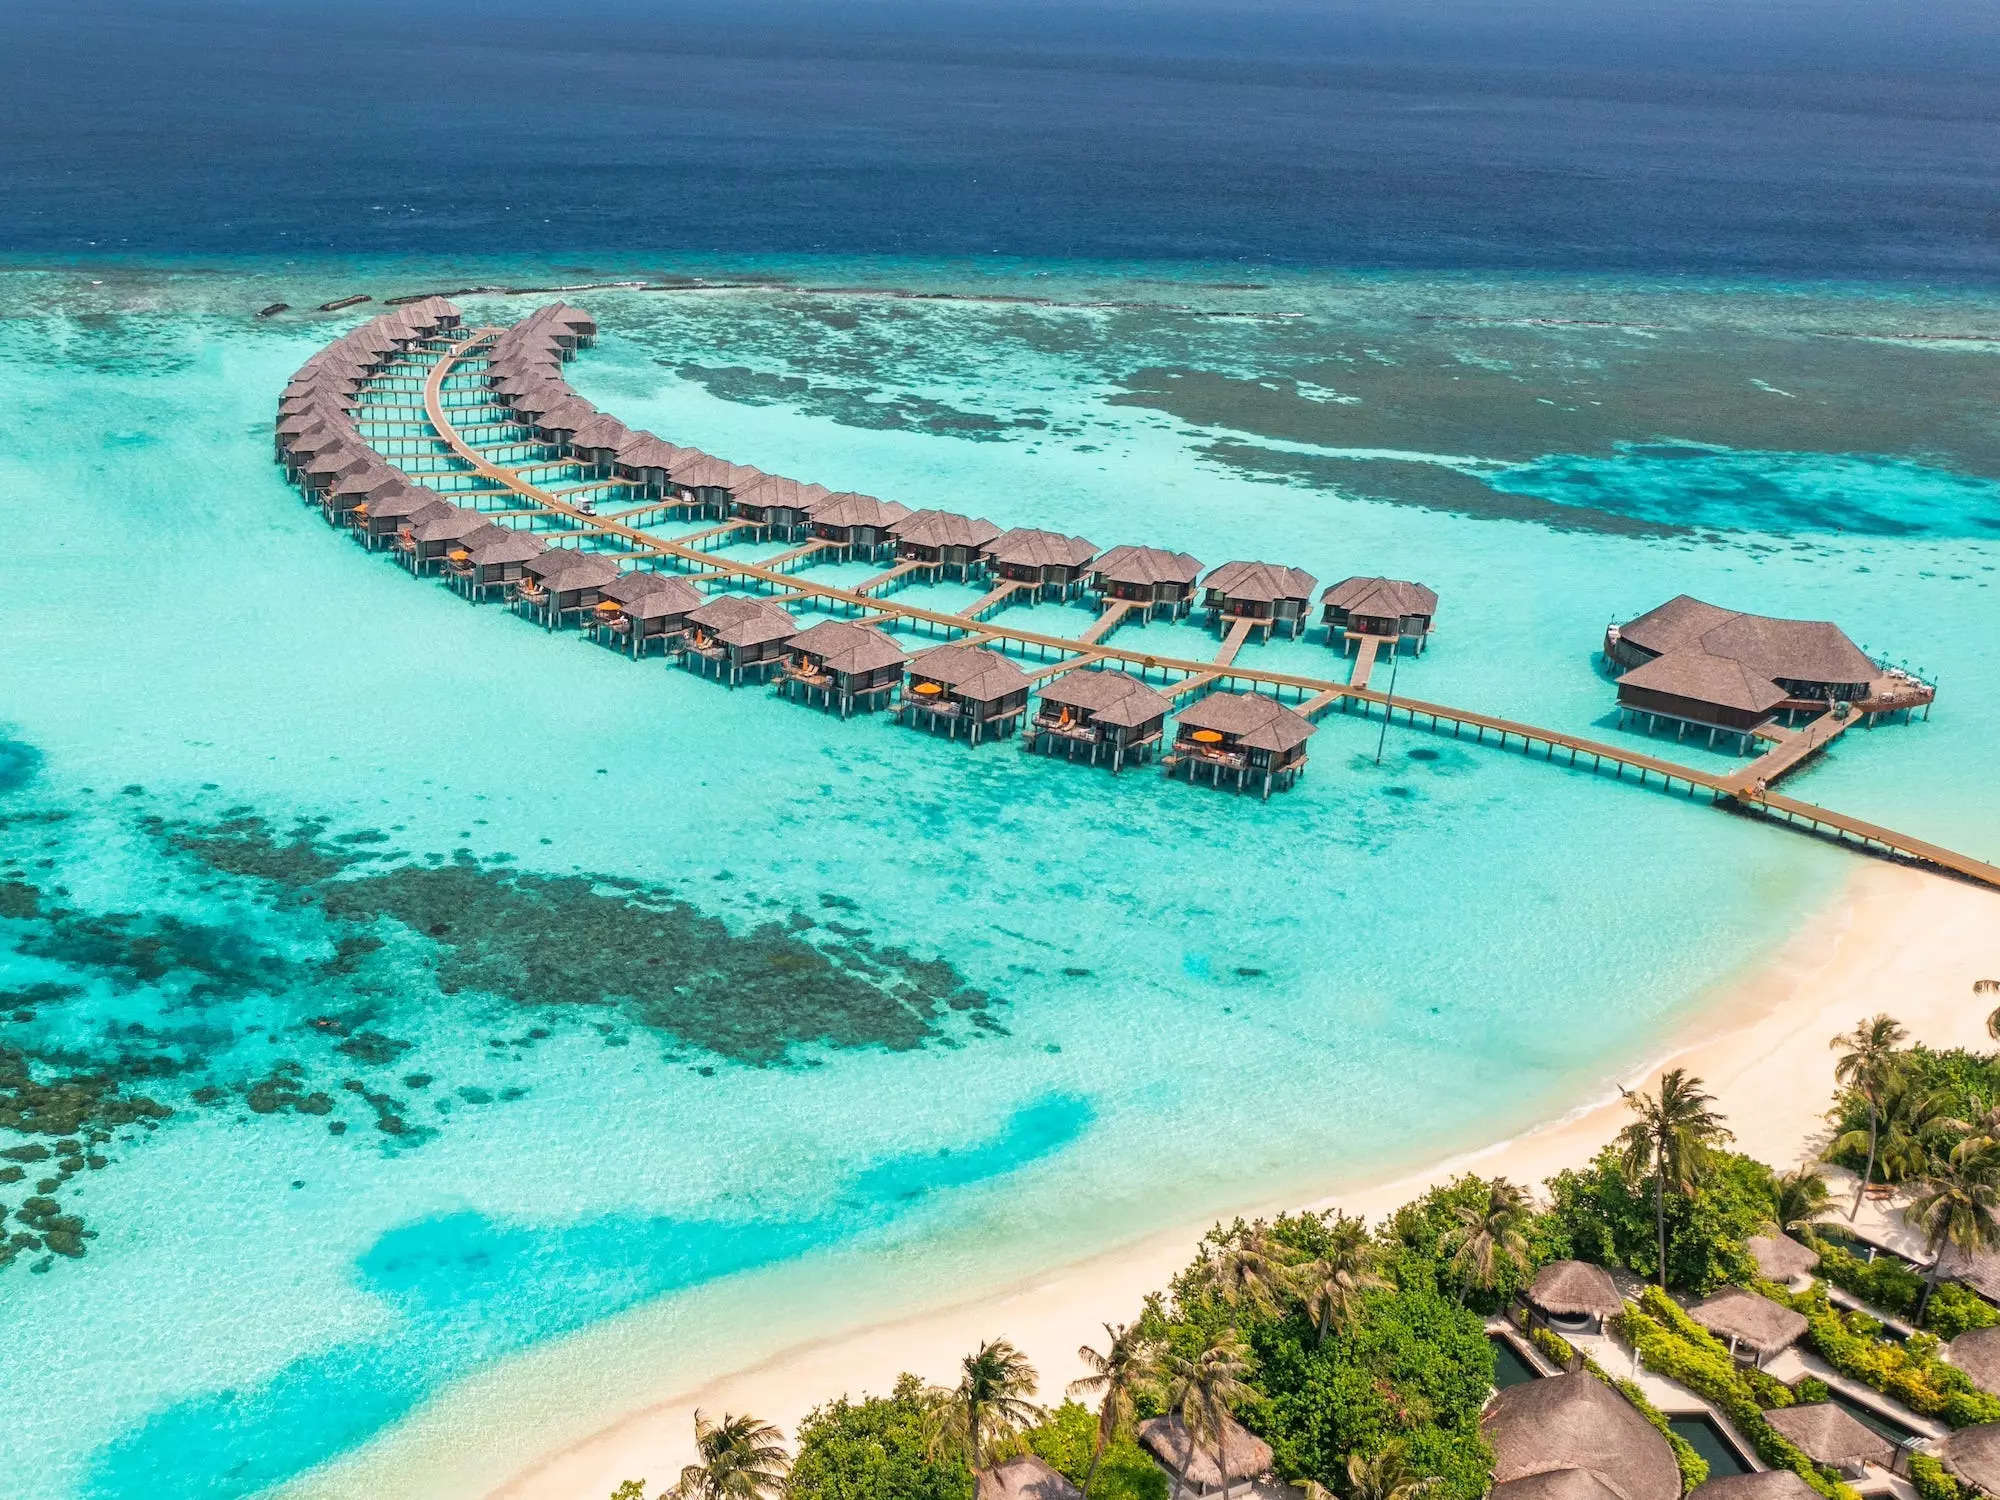 A birds-eye view of bungalows in The Maldives.